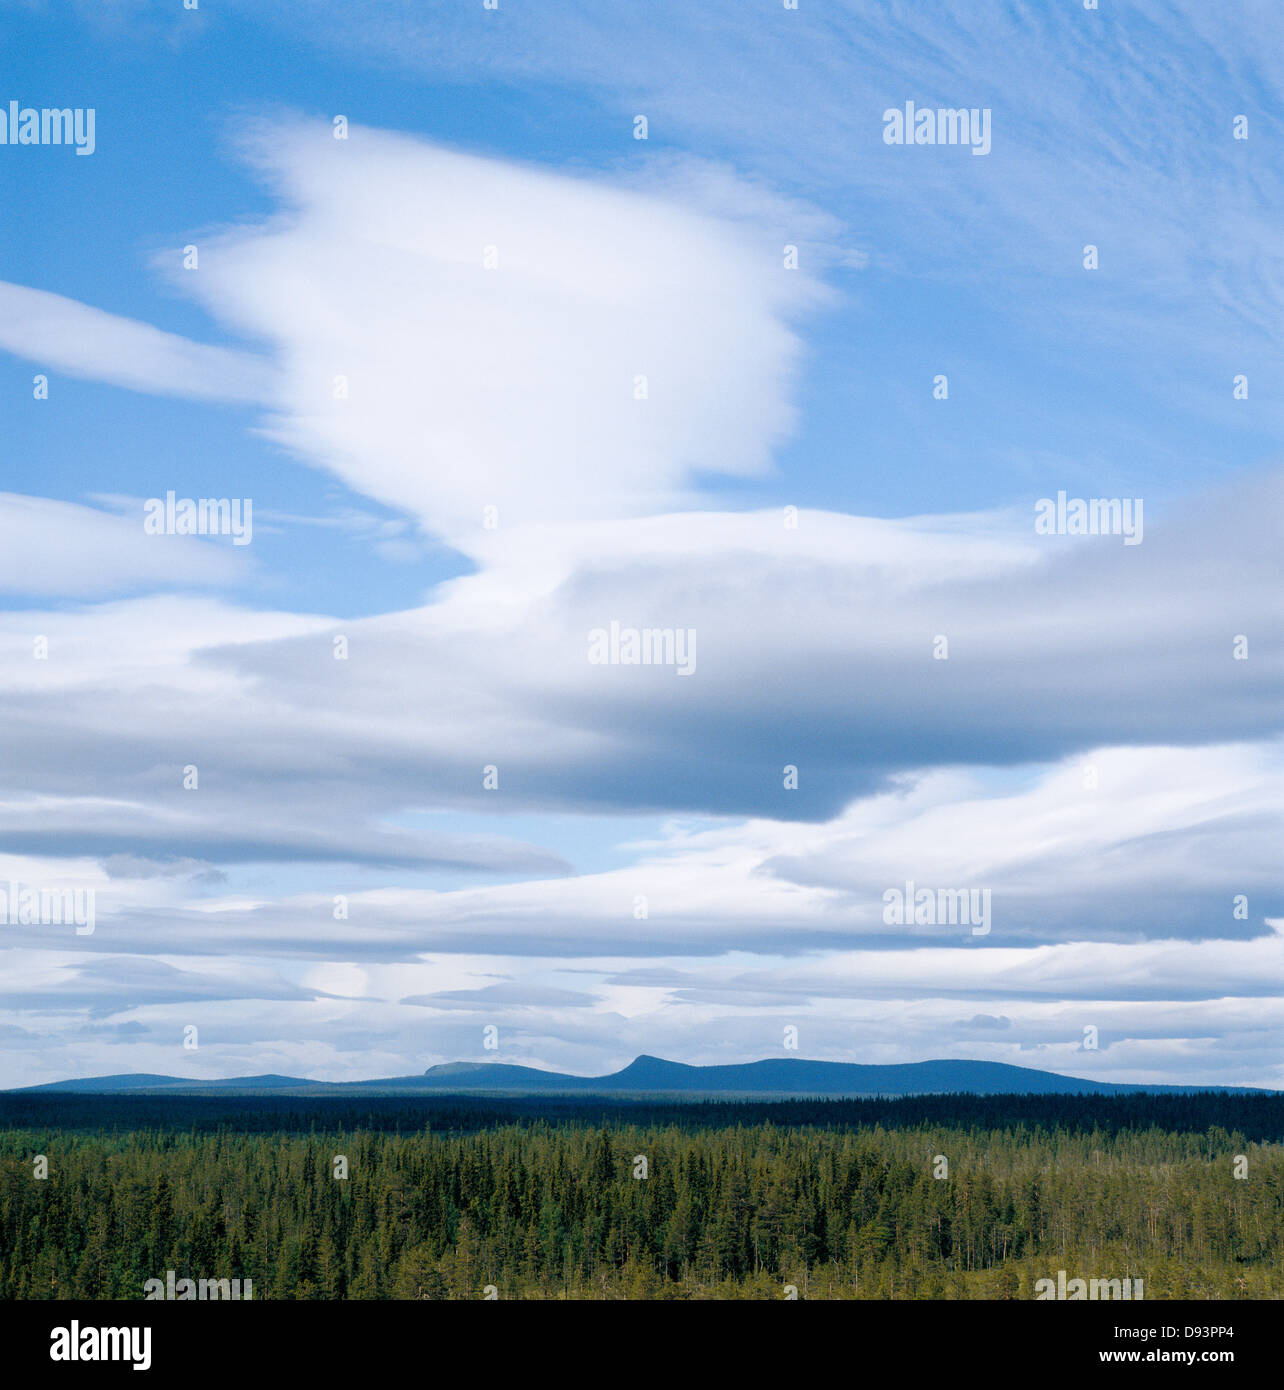 Cloud over mountain landscape in the north of Sweden. Stock Photo